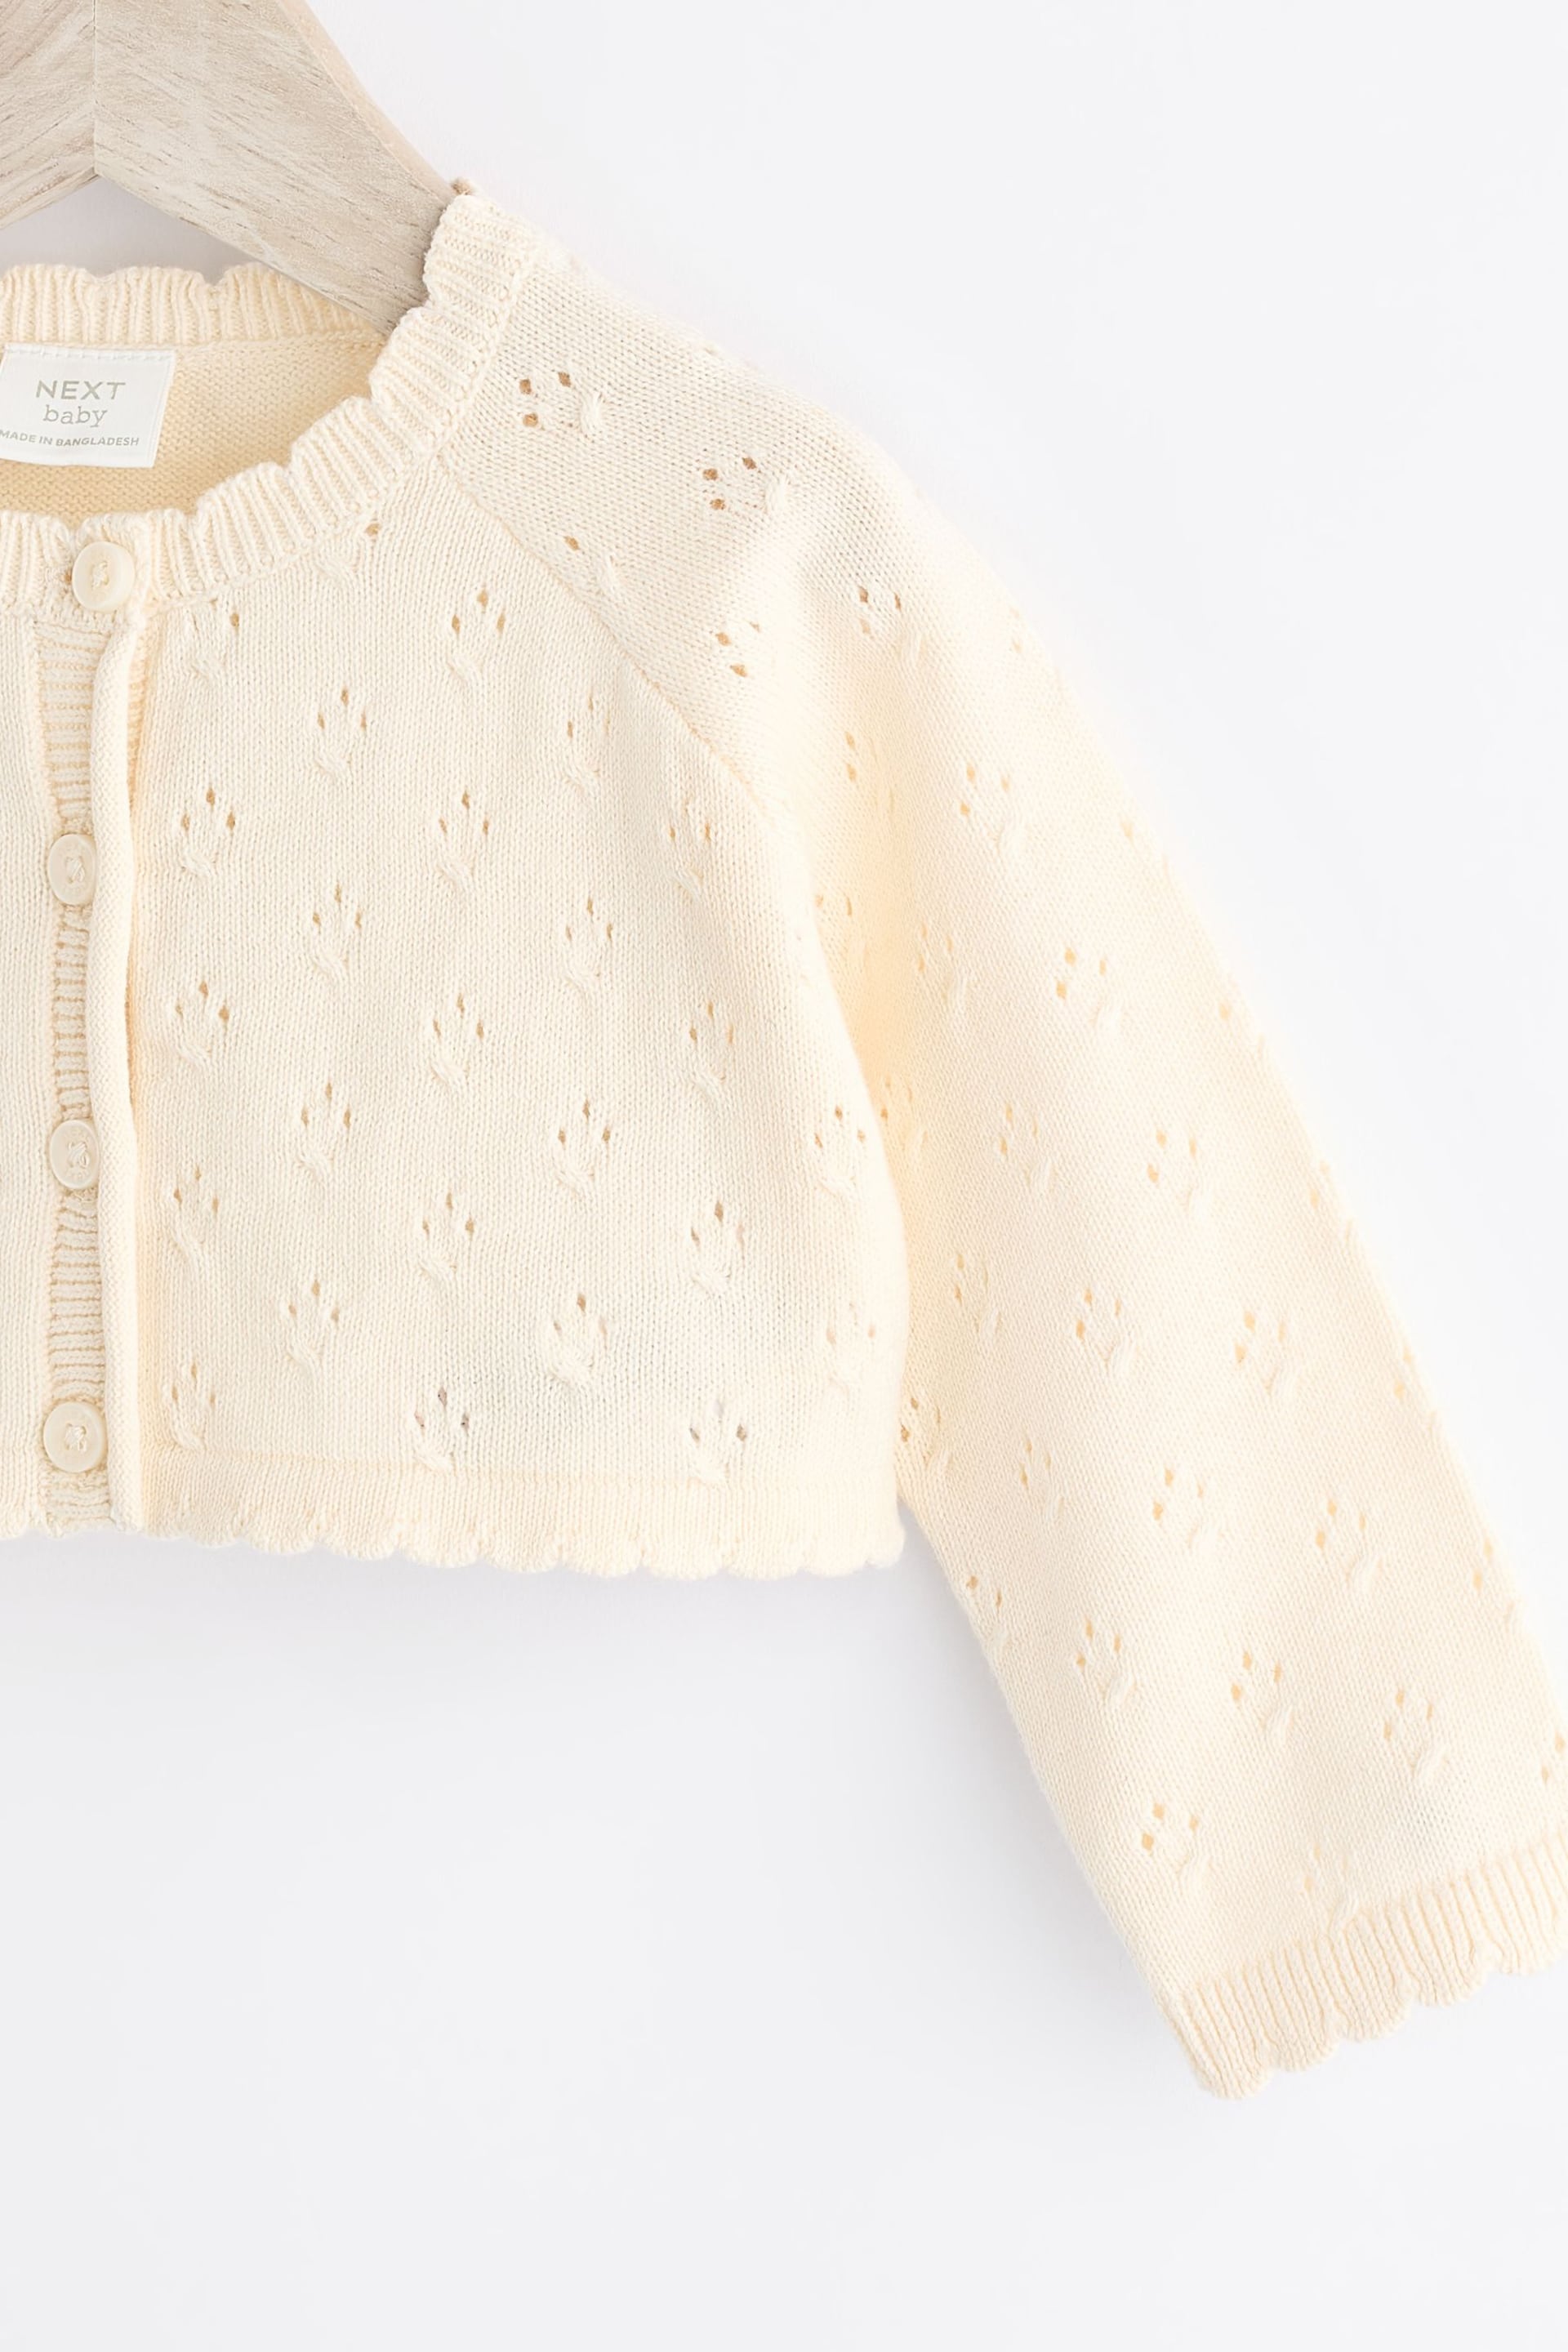 Cream Pointelle Baby Knitted Shrug Cardigan (0mths-2yrs) - Image 3 of 7